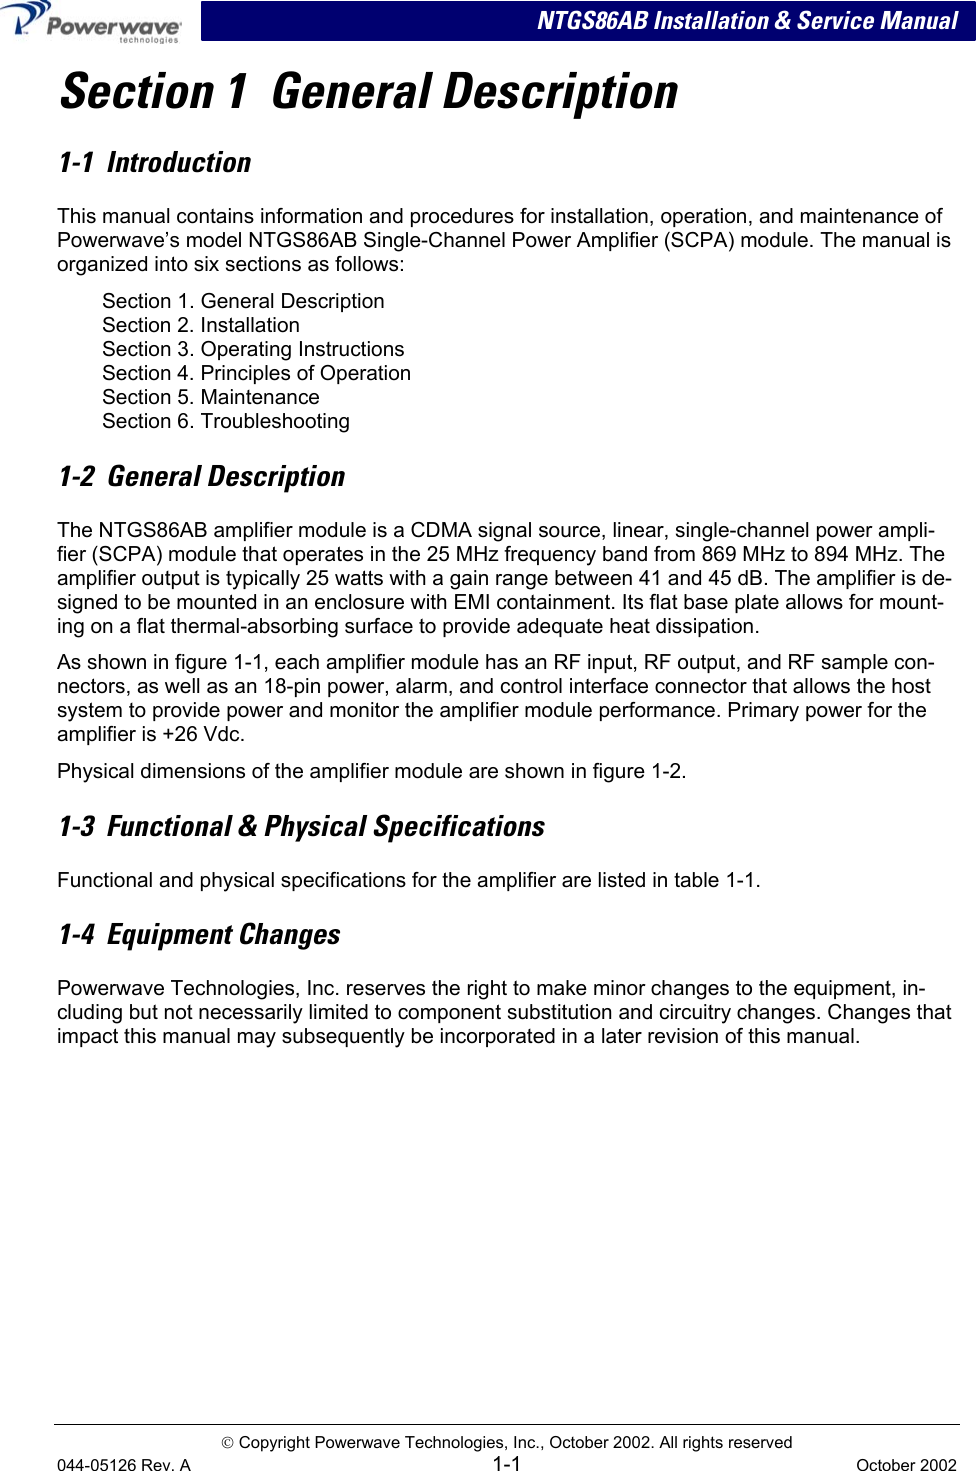   NTGS86AB Installation &amp; Service Manual Section 1  General Description 1-1  Introduction This manual contains information and procedures for installation, operation, and maintenance of Powerwave’s model NTGS86AB Single-Channel Power Amplifier (SCPA) module. The manual is organized into six sections as follows: Section 1. General Description Section 2. Installation Section 3. Operating Instructions Section 4. Principles of Operation Section 5. Maintenance Section 6. Troubleshooting 1-2  General Description The NTGS86AB amplifier module is a CDMA signal source, linear, single-channel power ampli-fier (SCPA) module that operates in the 25 MHz frequency band from 869 MHz to 894 MHz. The amplifier output is typically 25 watts with a gain range between 41 and 45 dB. The amplifier is de-signed to be mounted in an enclosure with EMI containment. Its flat base plate allows for mount-ing on a flat thermal-absorbing surface to provide adequate heat dissipation. As shown in figure 1-1, each amplifier module has an RF input, RF output, and RF sample con-nectors, as well as an 18-pin power, alarm, and control interface connector that allows the host system to provide power and monitor the amplifier module performance. Primary power for the amplifier is +26 Vdc.  Physical dimensions of the amplifier module are shown in figure 1-2. 1-3  Functional &amp; Physical Specifications Functional and physical specifications for the amplifier are listed in table 1-1. 1-4  Equipment Changes Powerwave Technologies, Inc. reserves the right to make minor changes to the equipment, in-cluding but not necessarily limited to component substitution and circuitry changes. Changes that impact this manual may subsequently be incorporated in a later revision of this manual.    Copyright Powerwave Technologies, Inc., October 2002. All rights reserved 044-05126 Rev. A 1-1  October 2002  